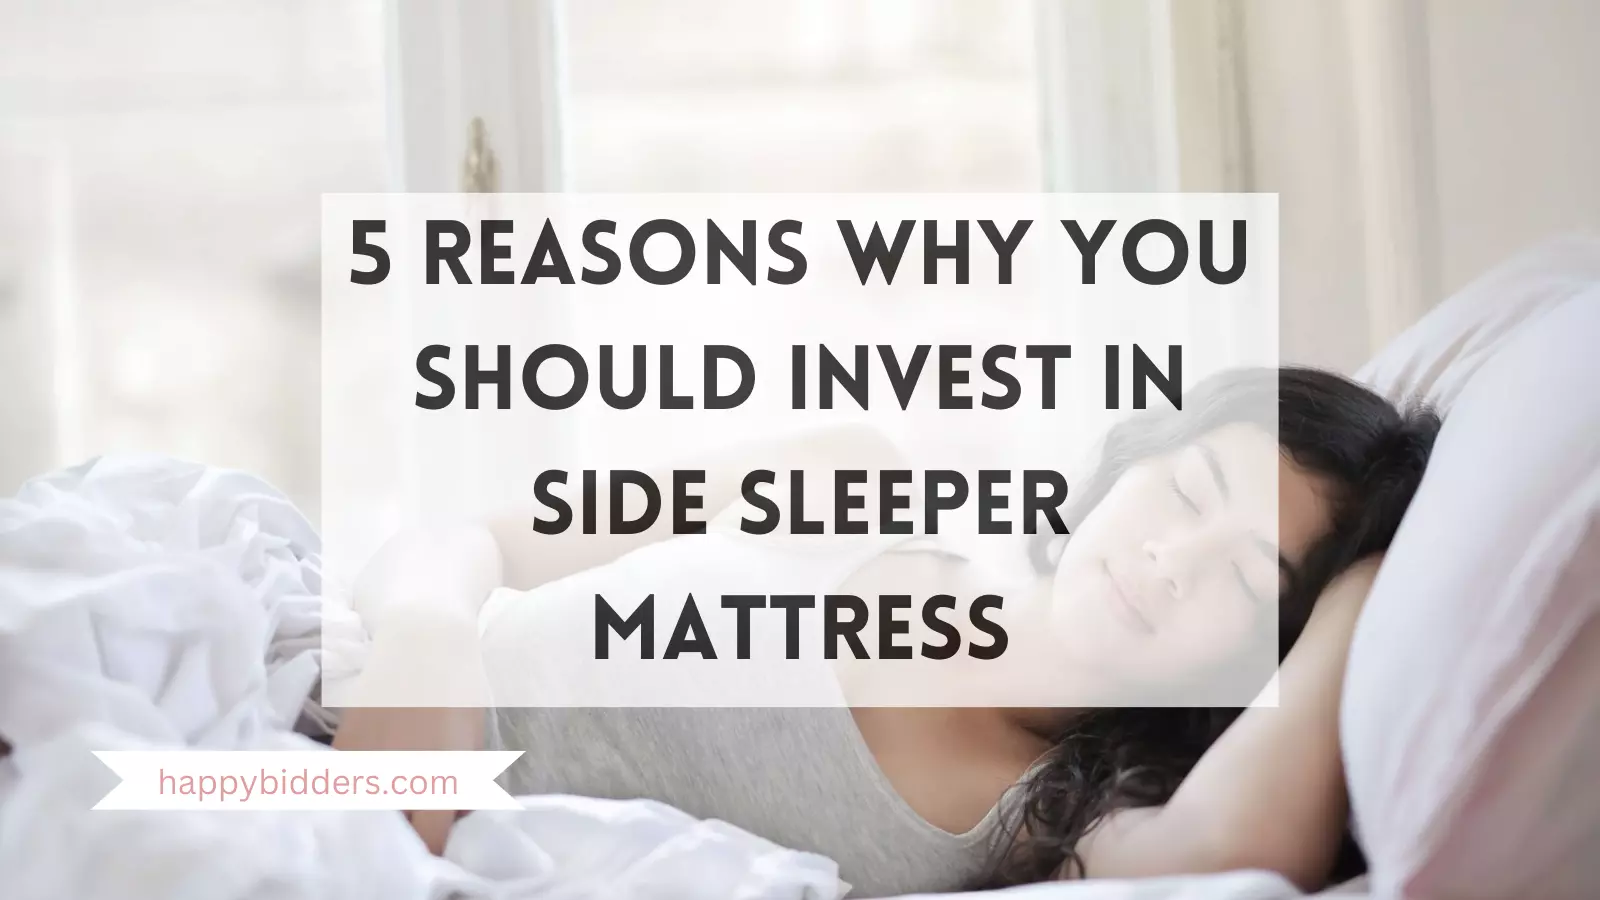 5 Reasons Why You Should Invest In Side Sleeper Mattress